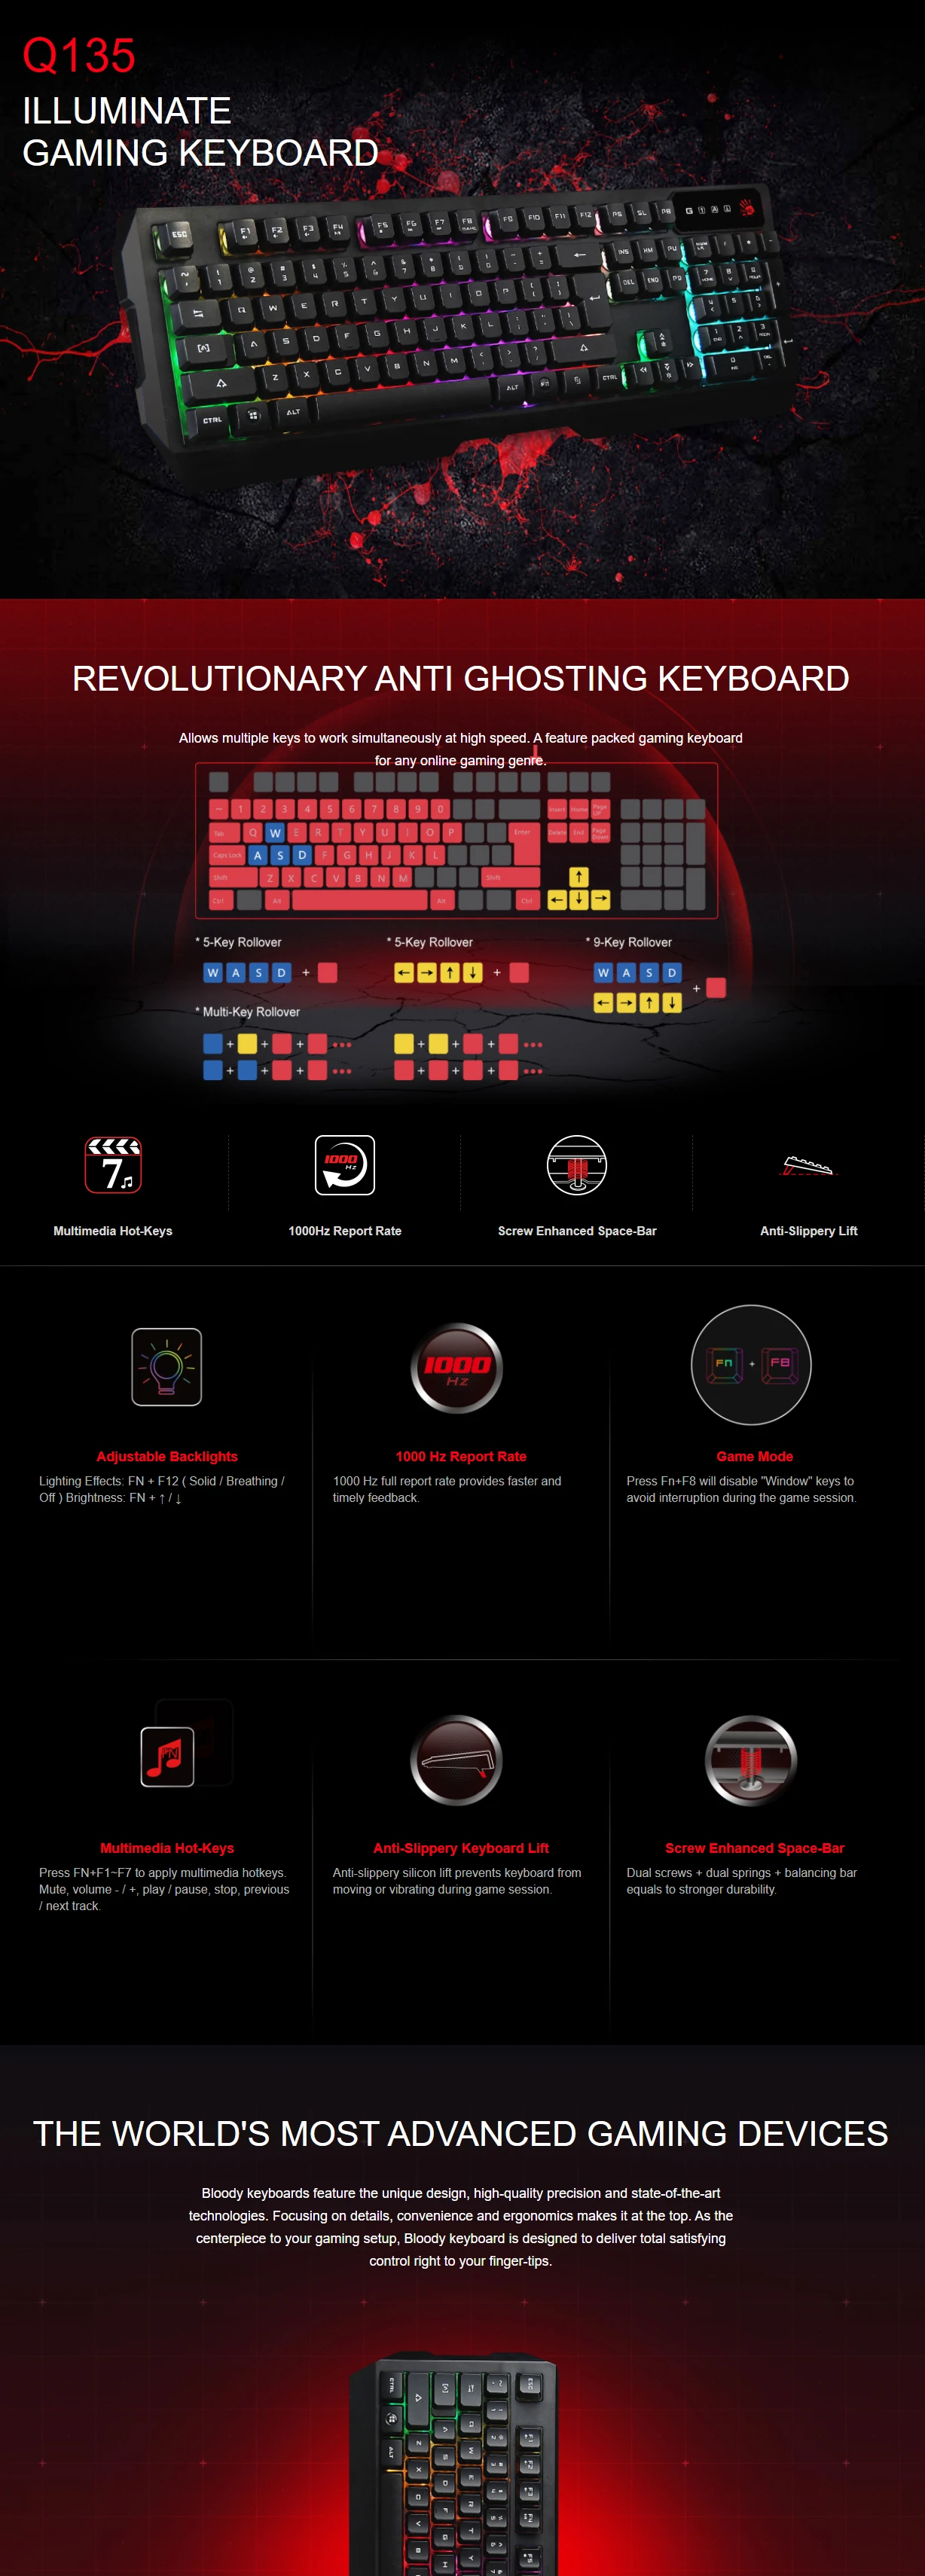 Overview - Bloody - Q135 Illuminate Gaming Keyboard